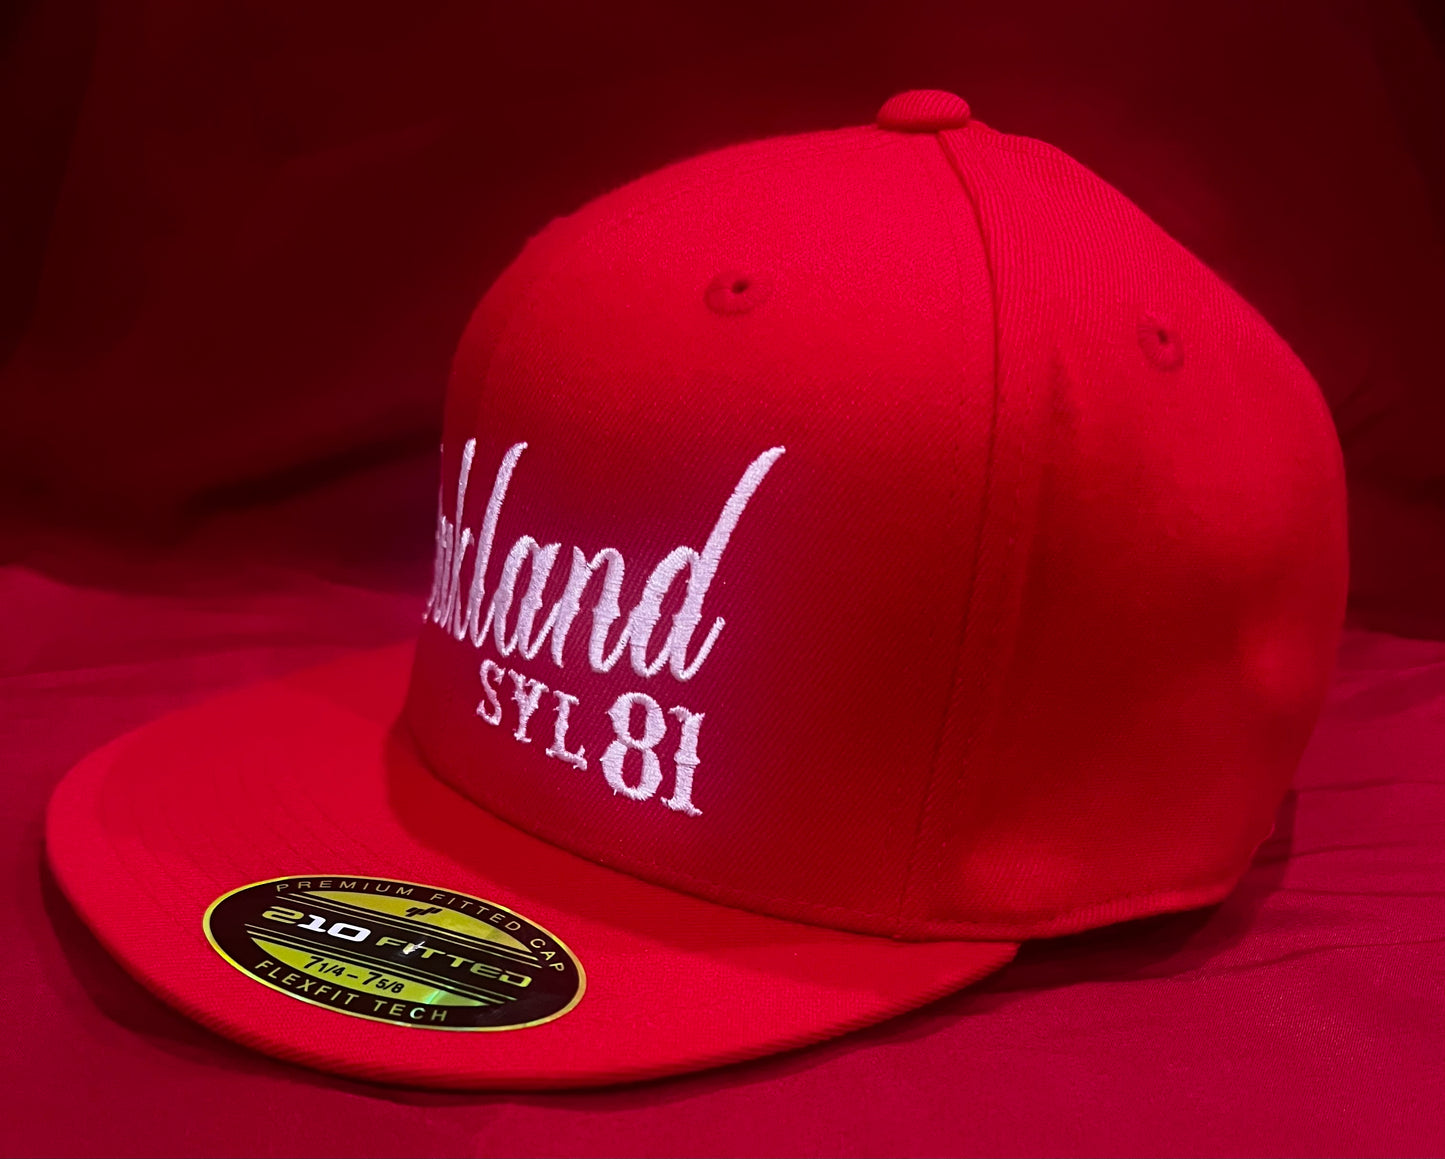 3 COLORS AVAILABLE - OAKLAND SLY81 HAT